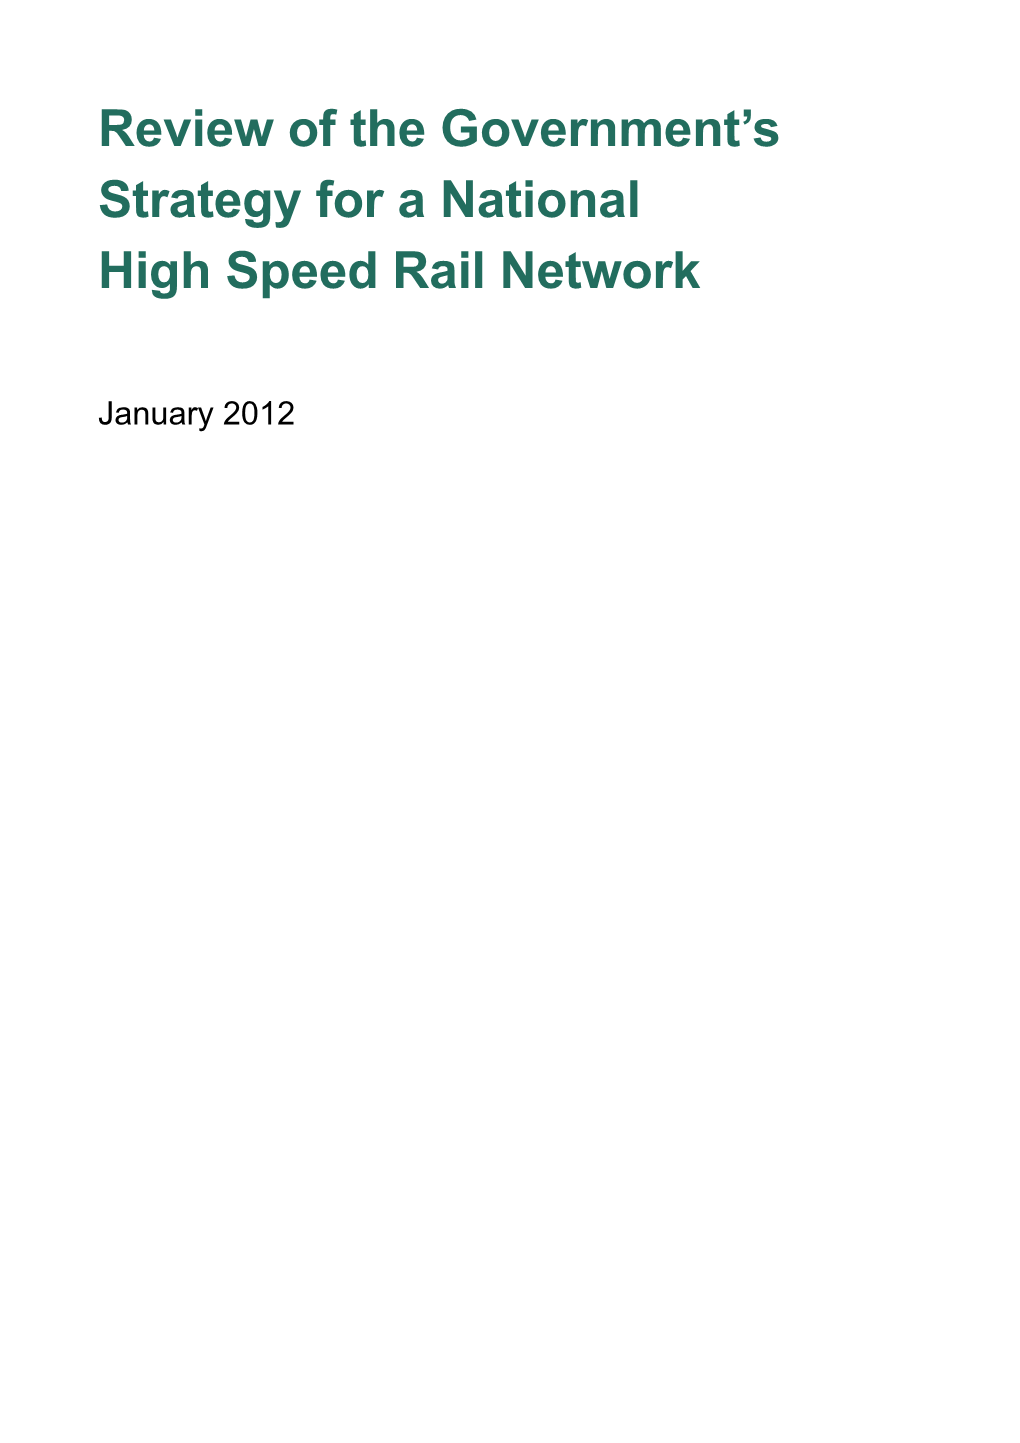 Review of the Government's Strategy for a National High Speed Rail Network